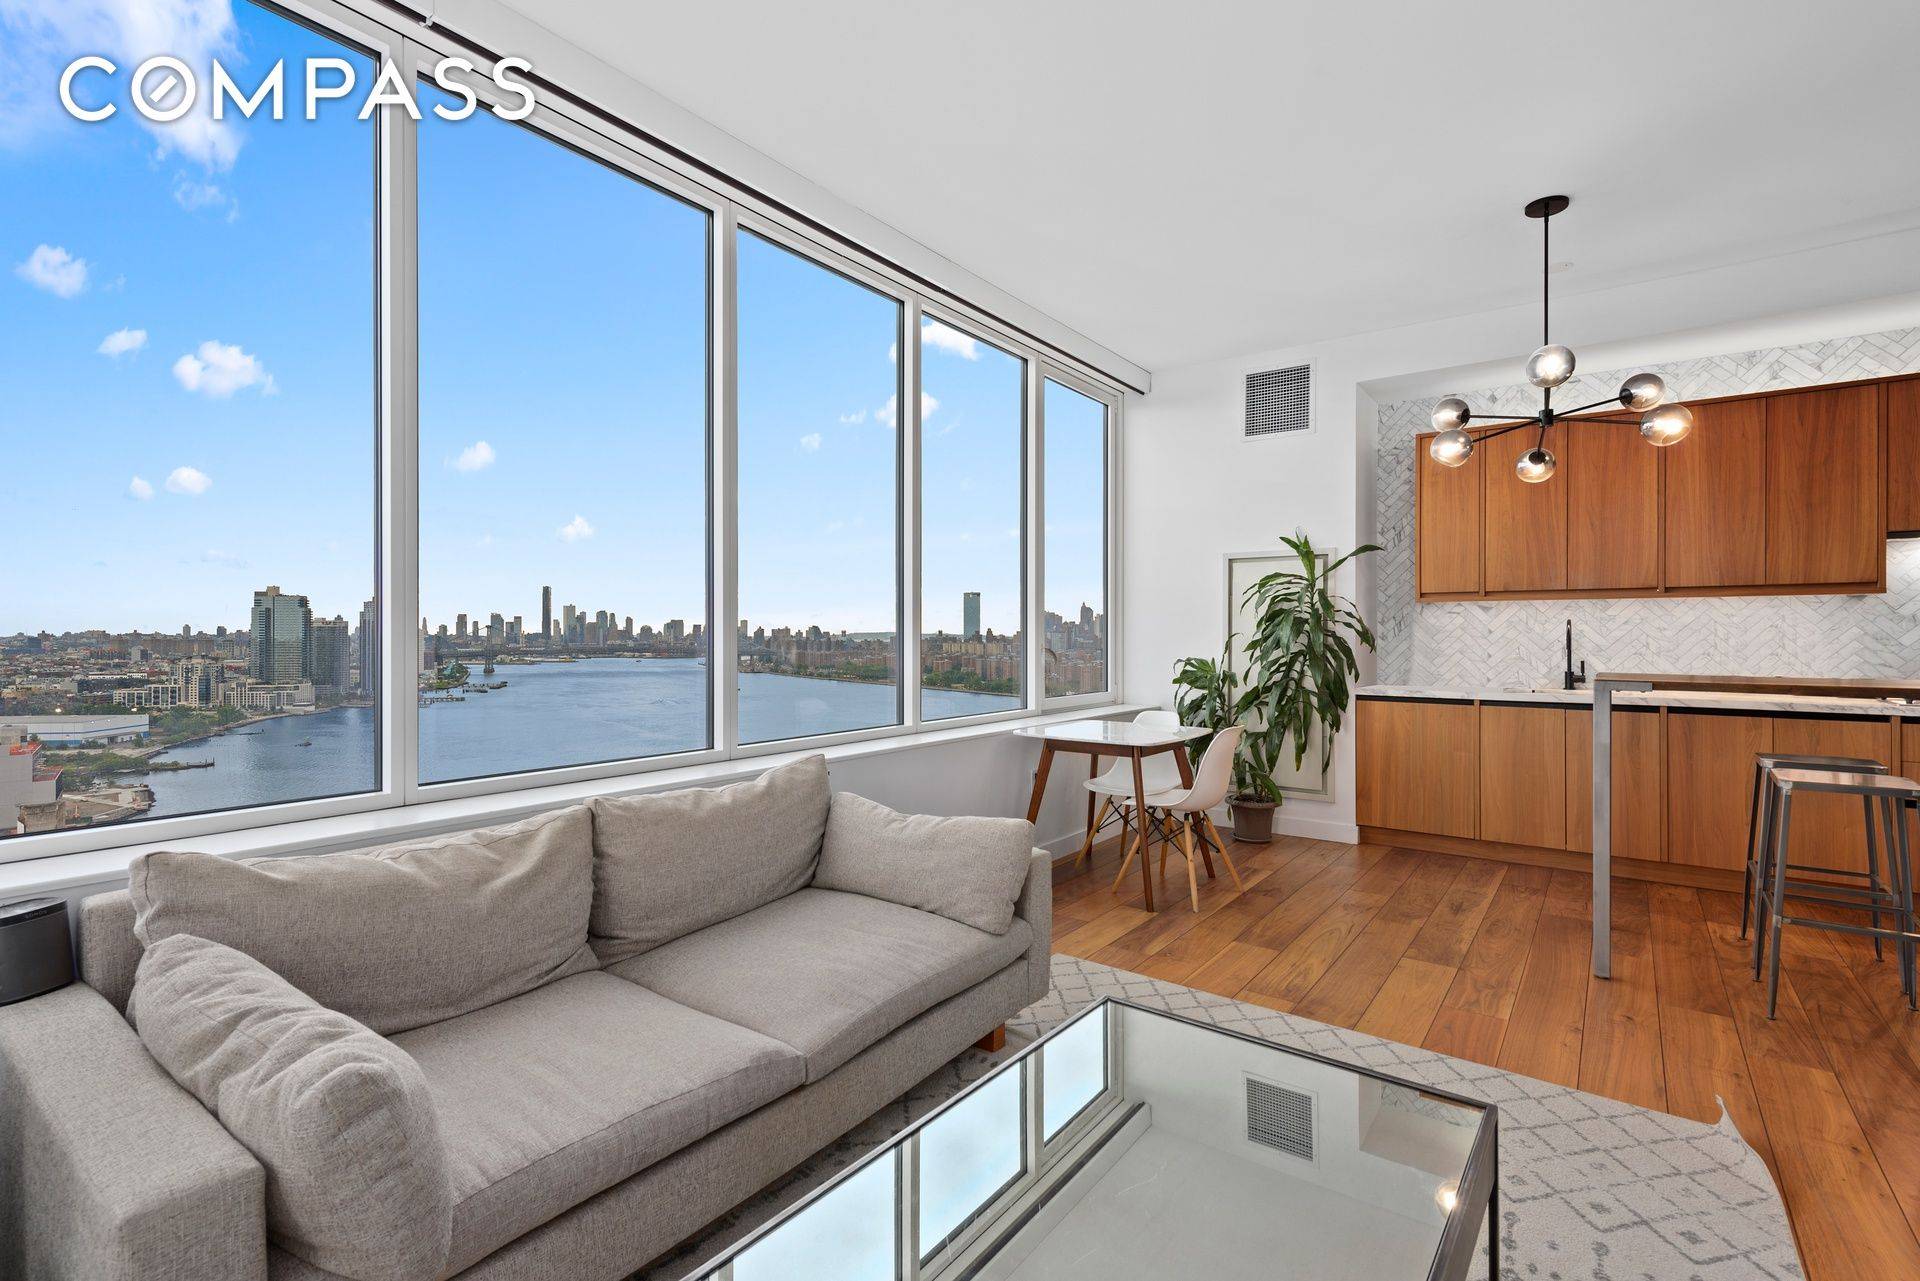 FURNISHED RENTAL Welcome to residence 29G, a one bedroom, one bathroom corner apartment with the best city skyline views in Brooklyn.